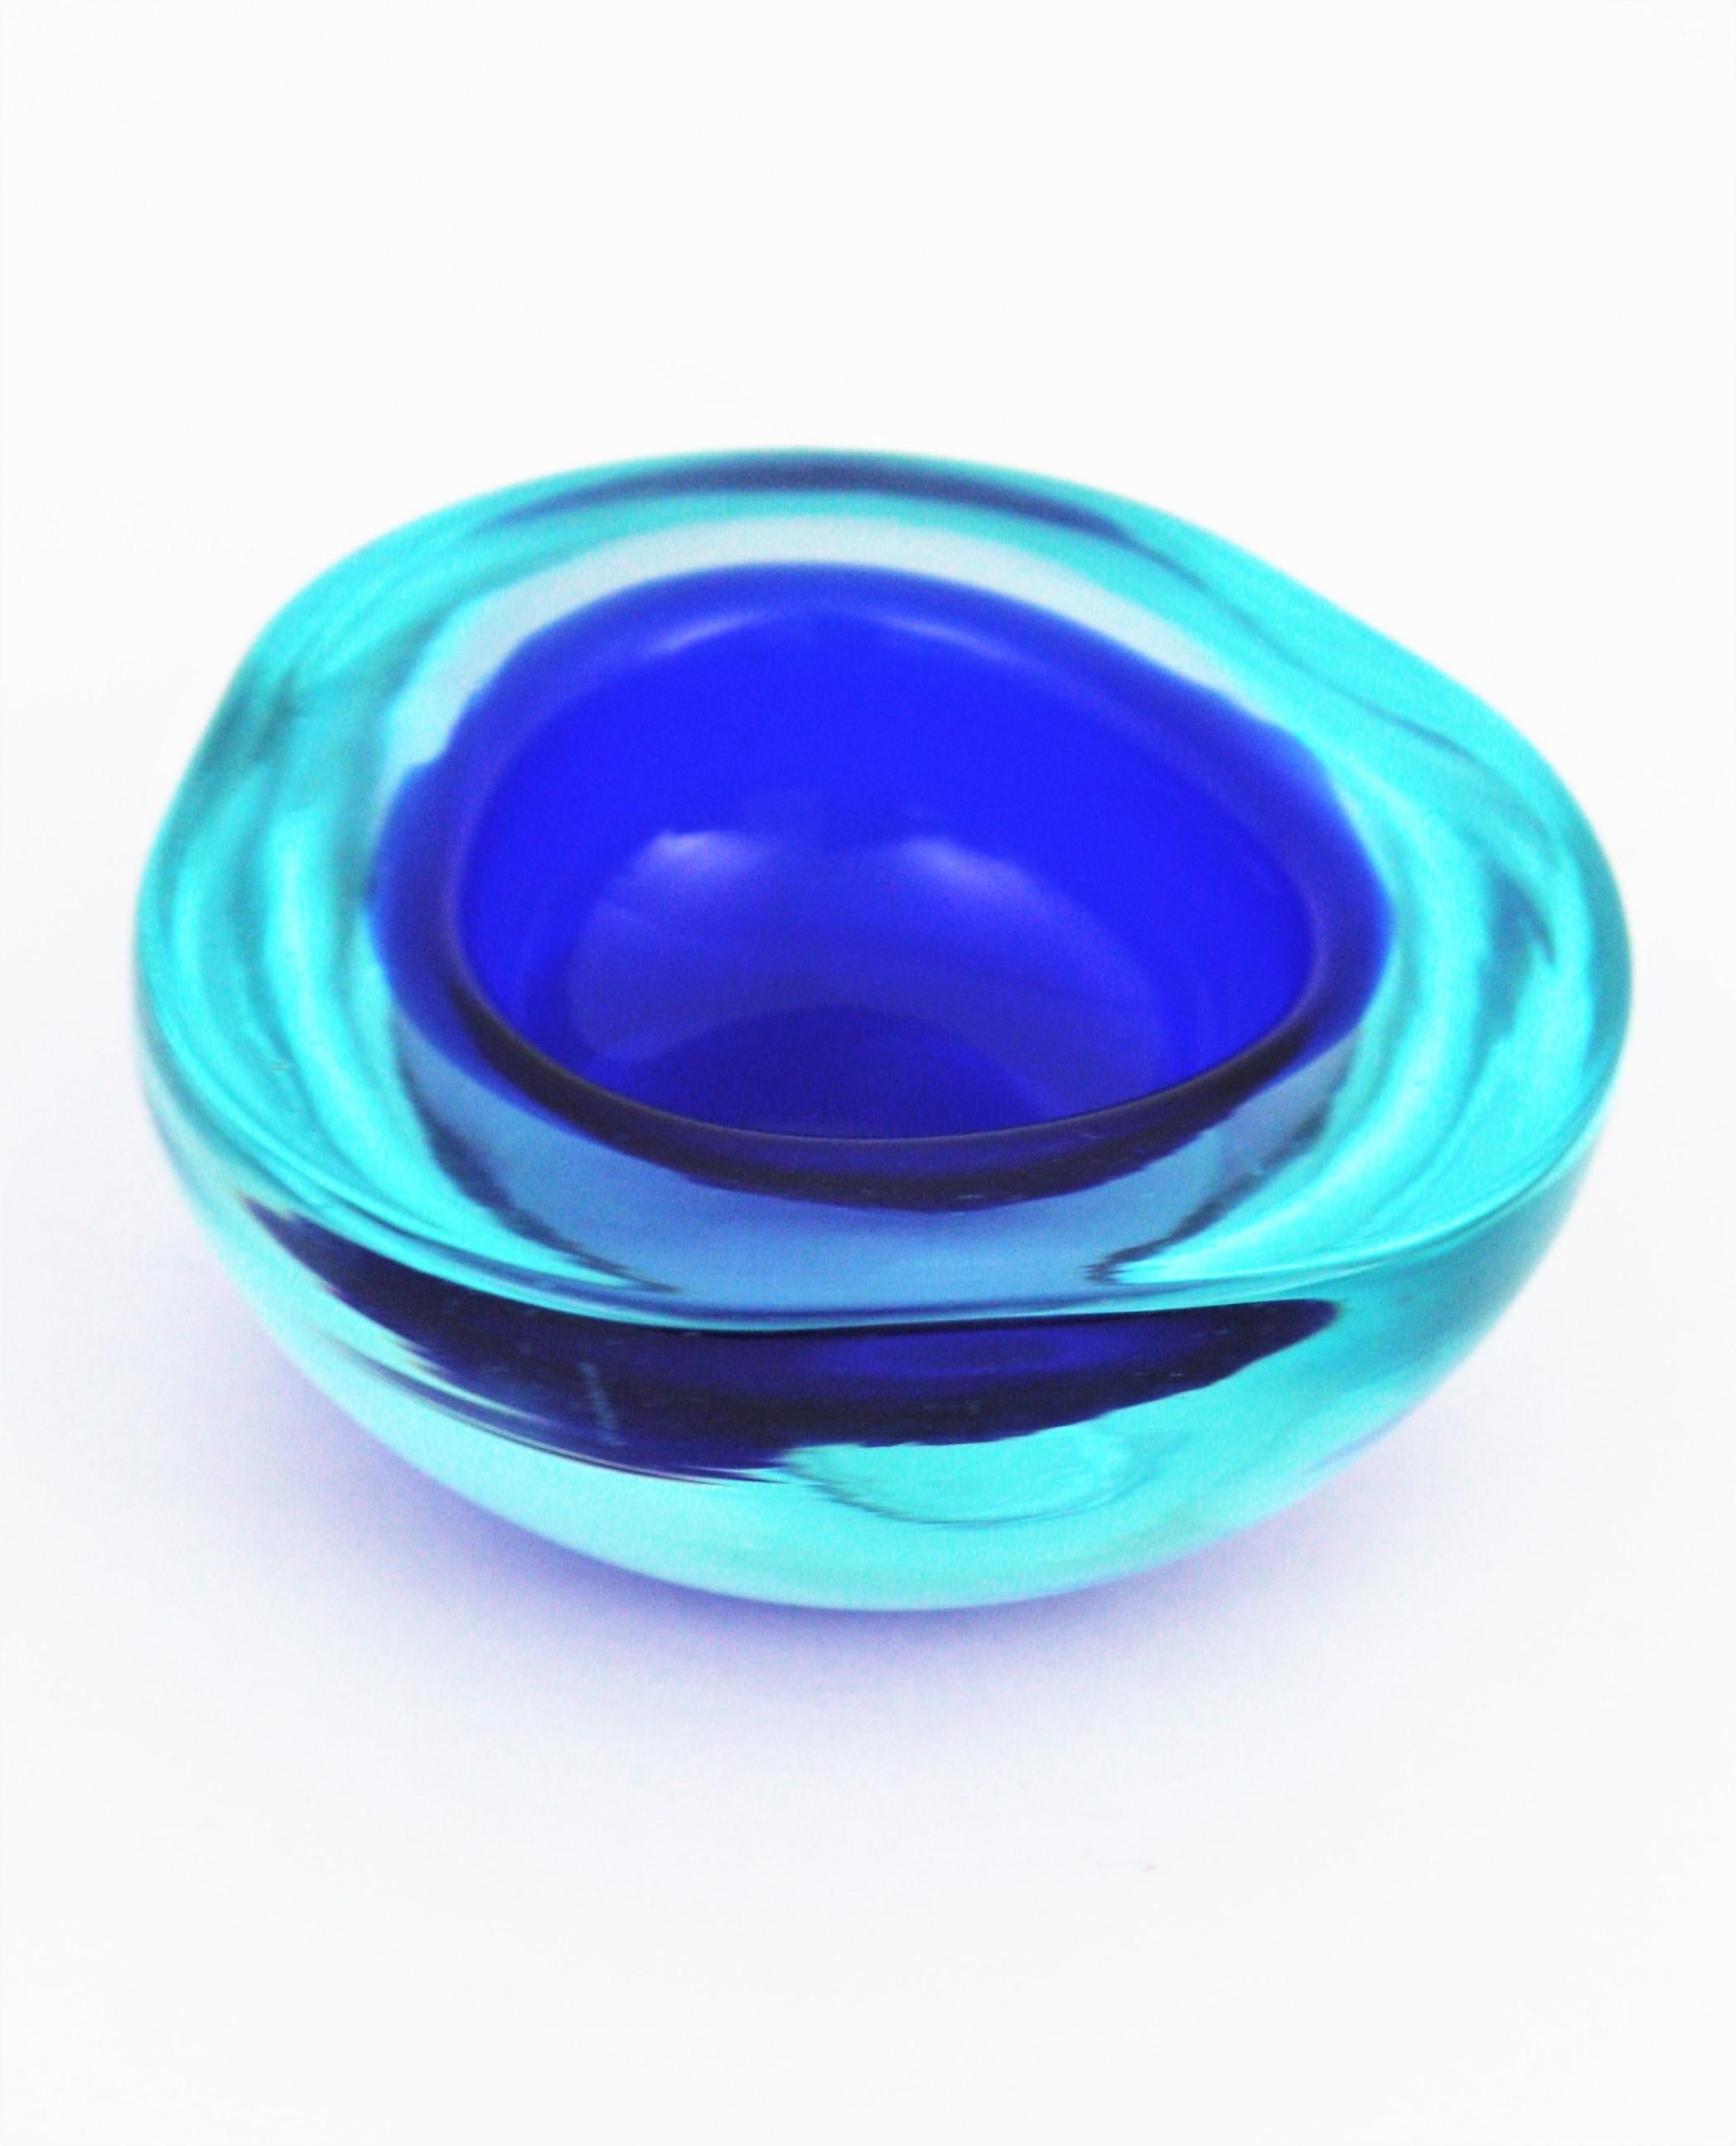 Archimede Seguso Murano Small Sommerso Blue Glass Geode Bowl, 1960s For Sale 3